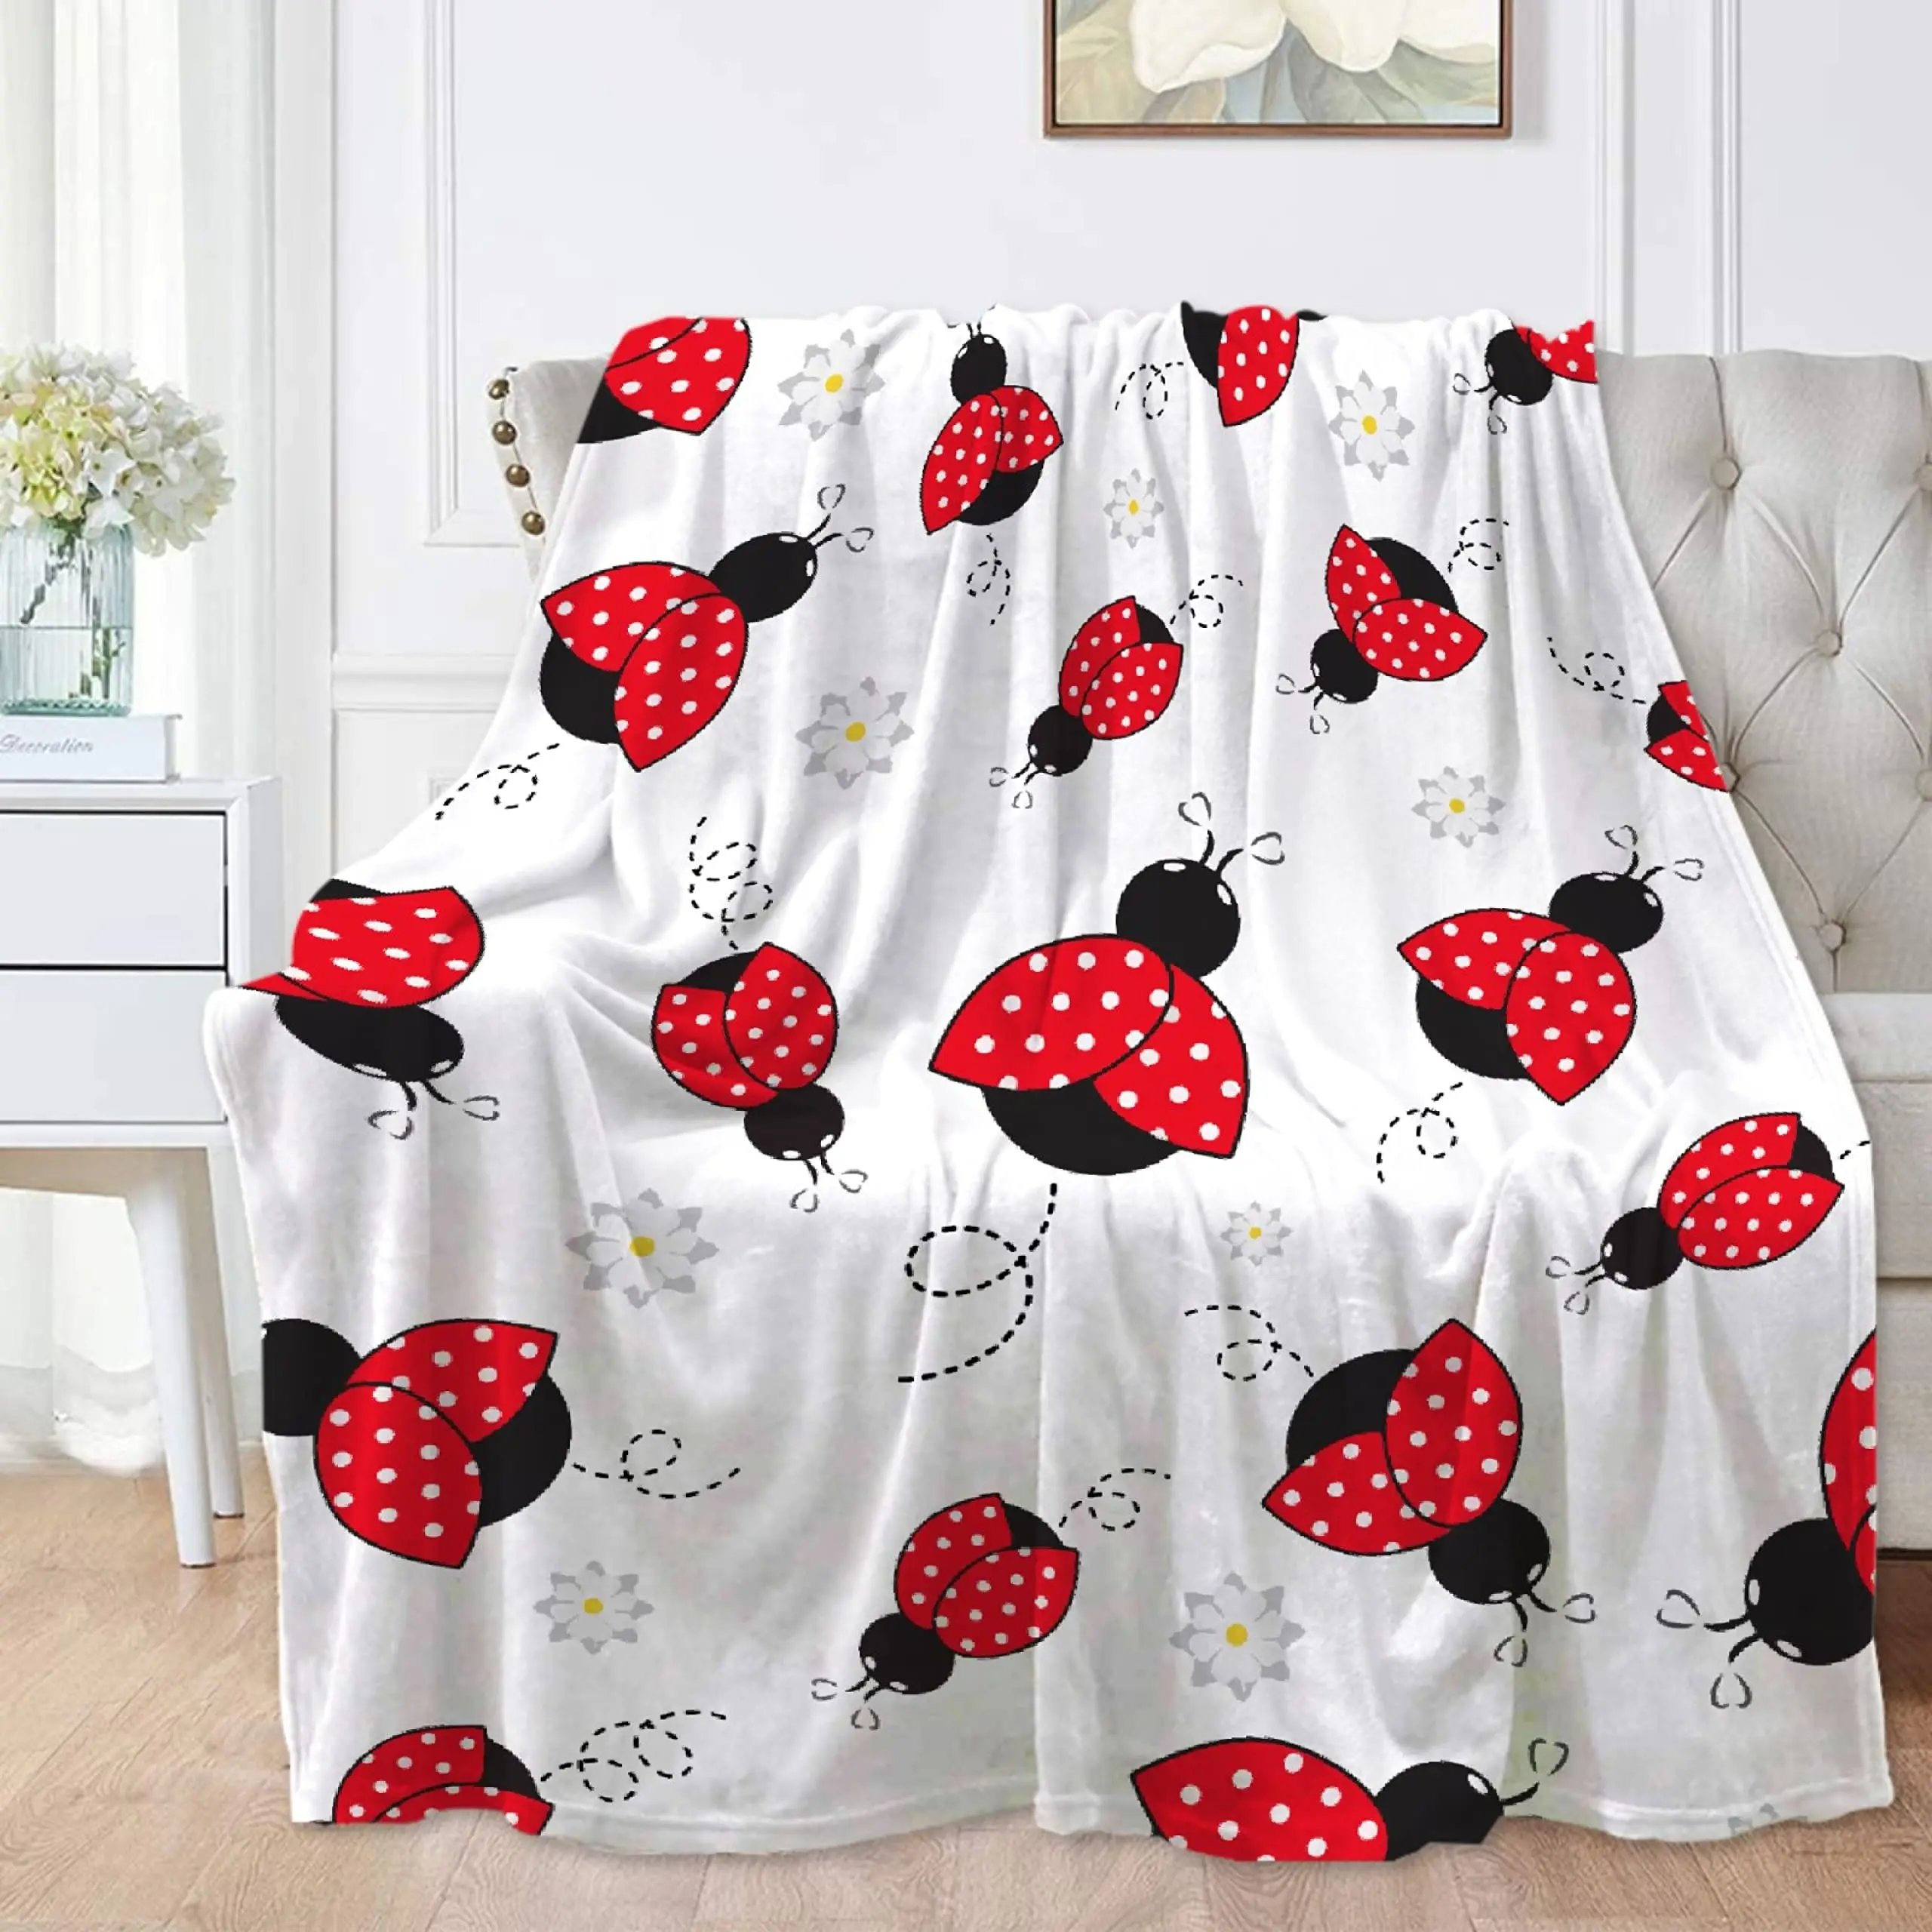 

Flannel Throw Blanket Christmas Red Super Lightweight Soft Warm Cozy Bed Couch Car for Children Adult Travel All Seasons Ladybug